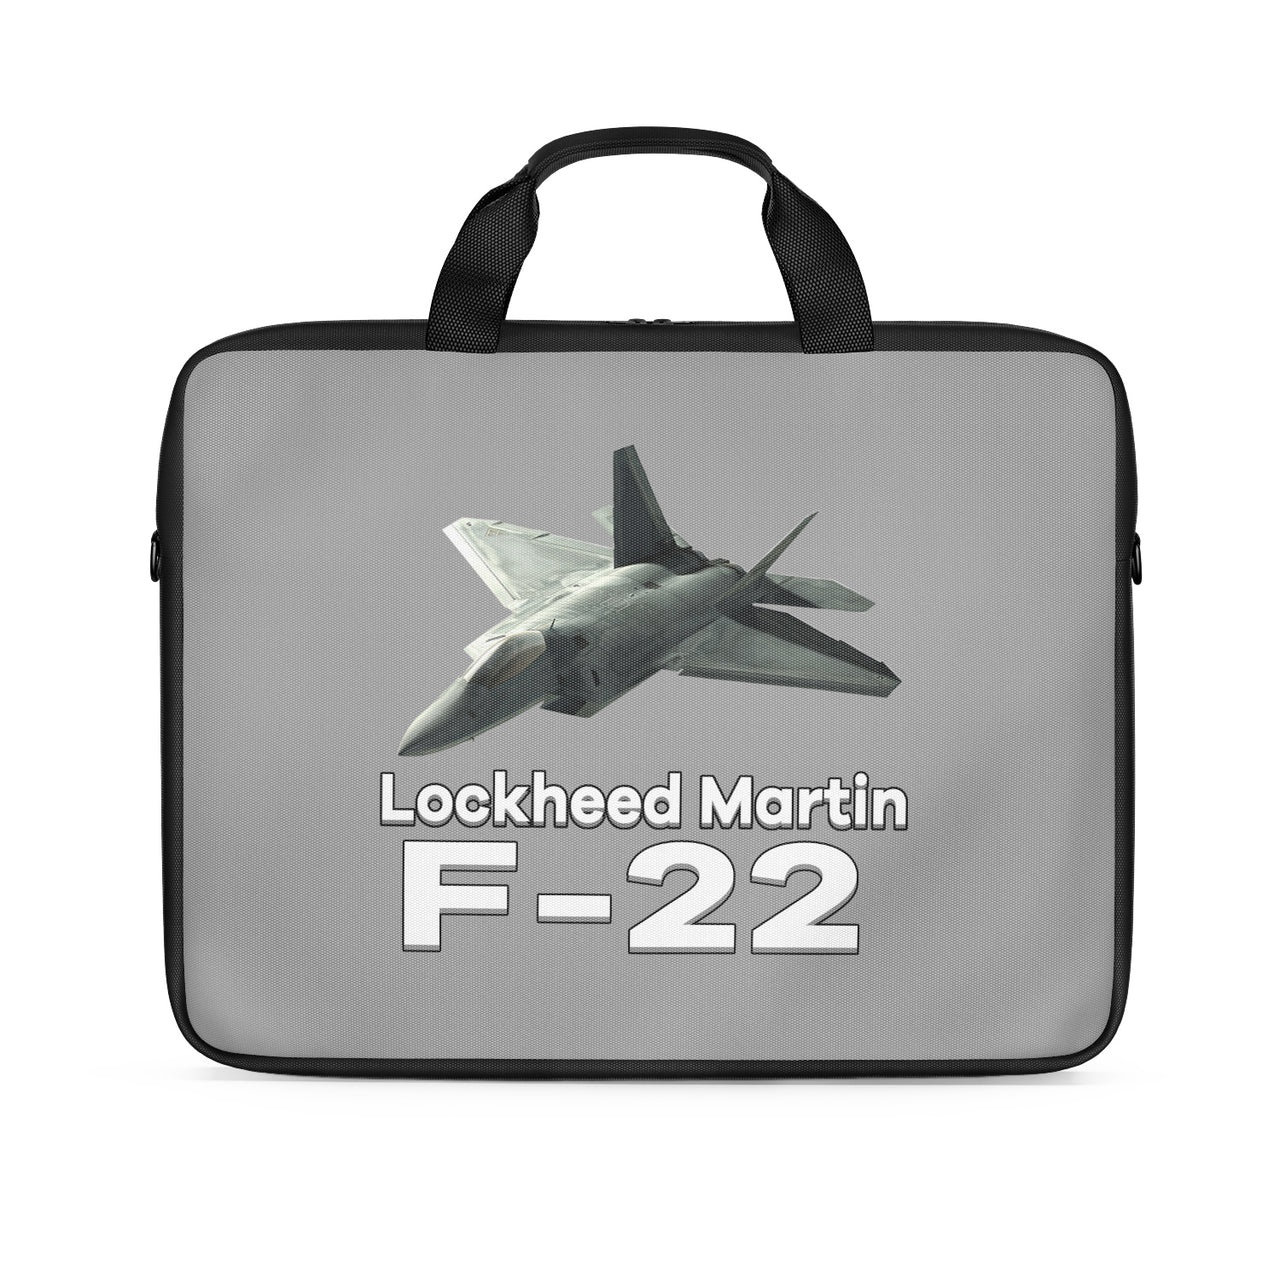 The Lockheed Martin F22 Designed Laptop & Tablet Bags